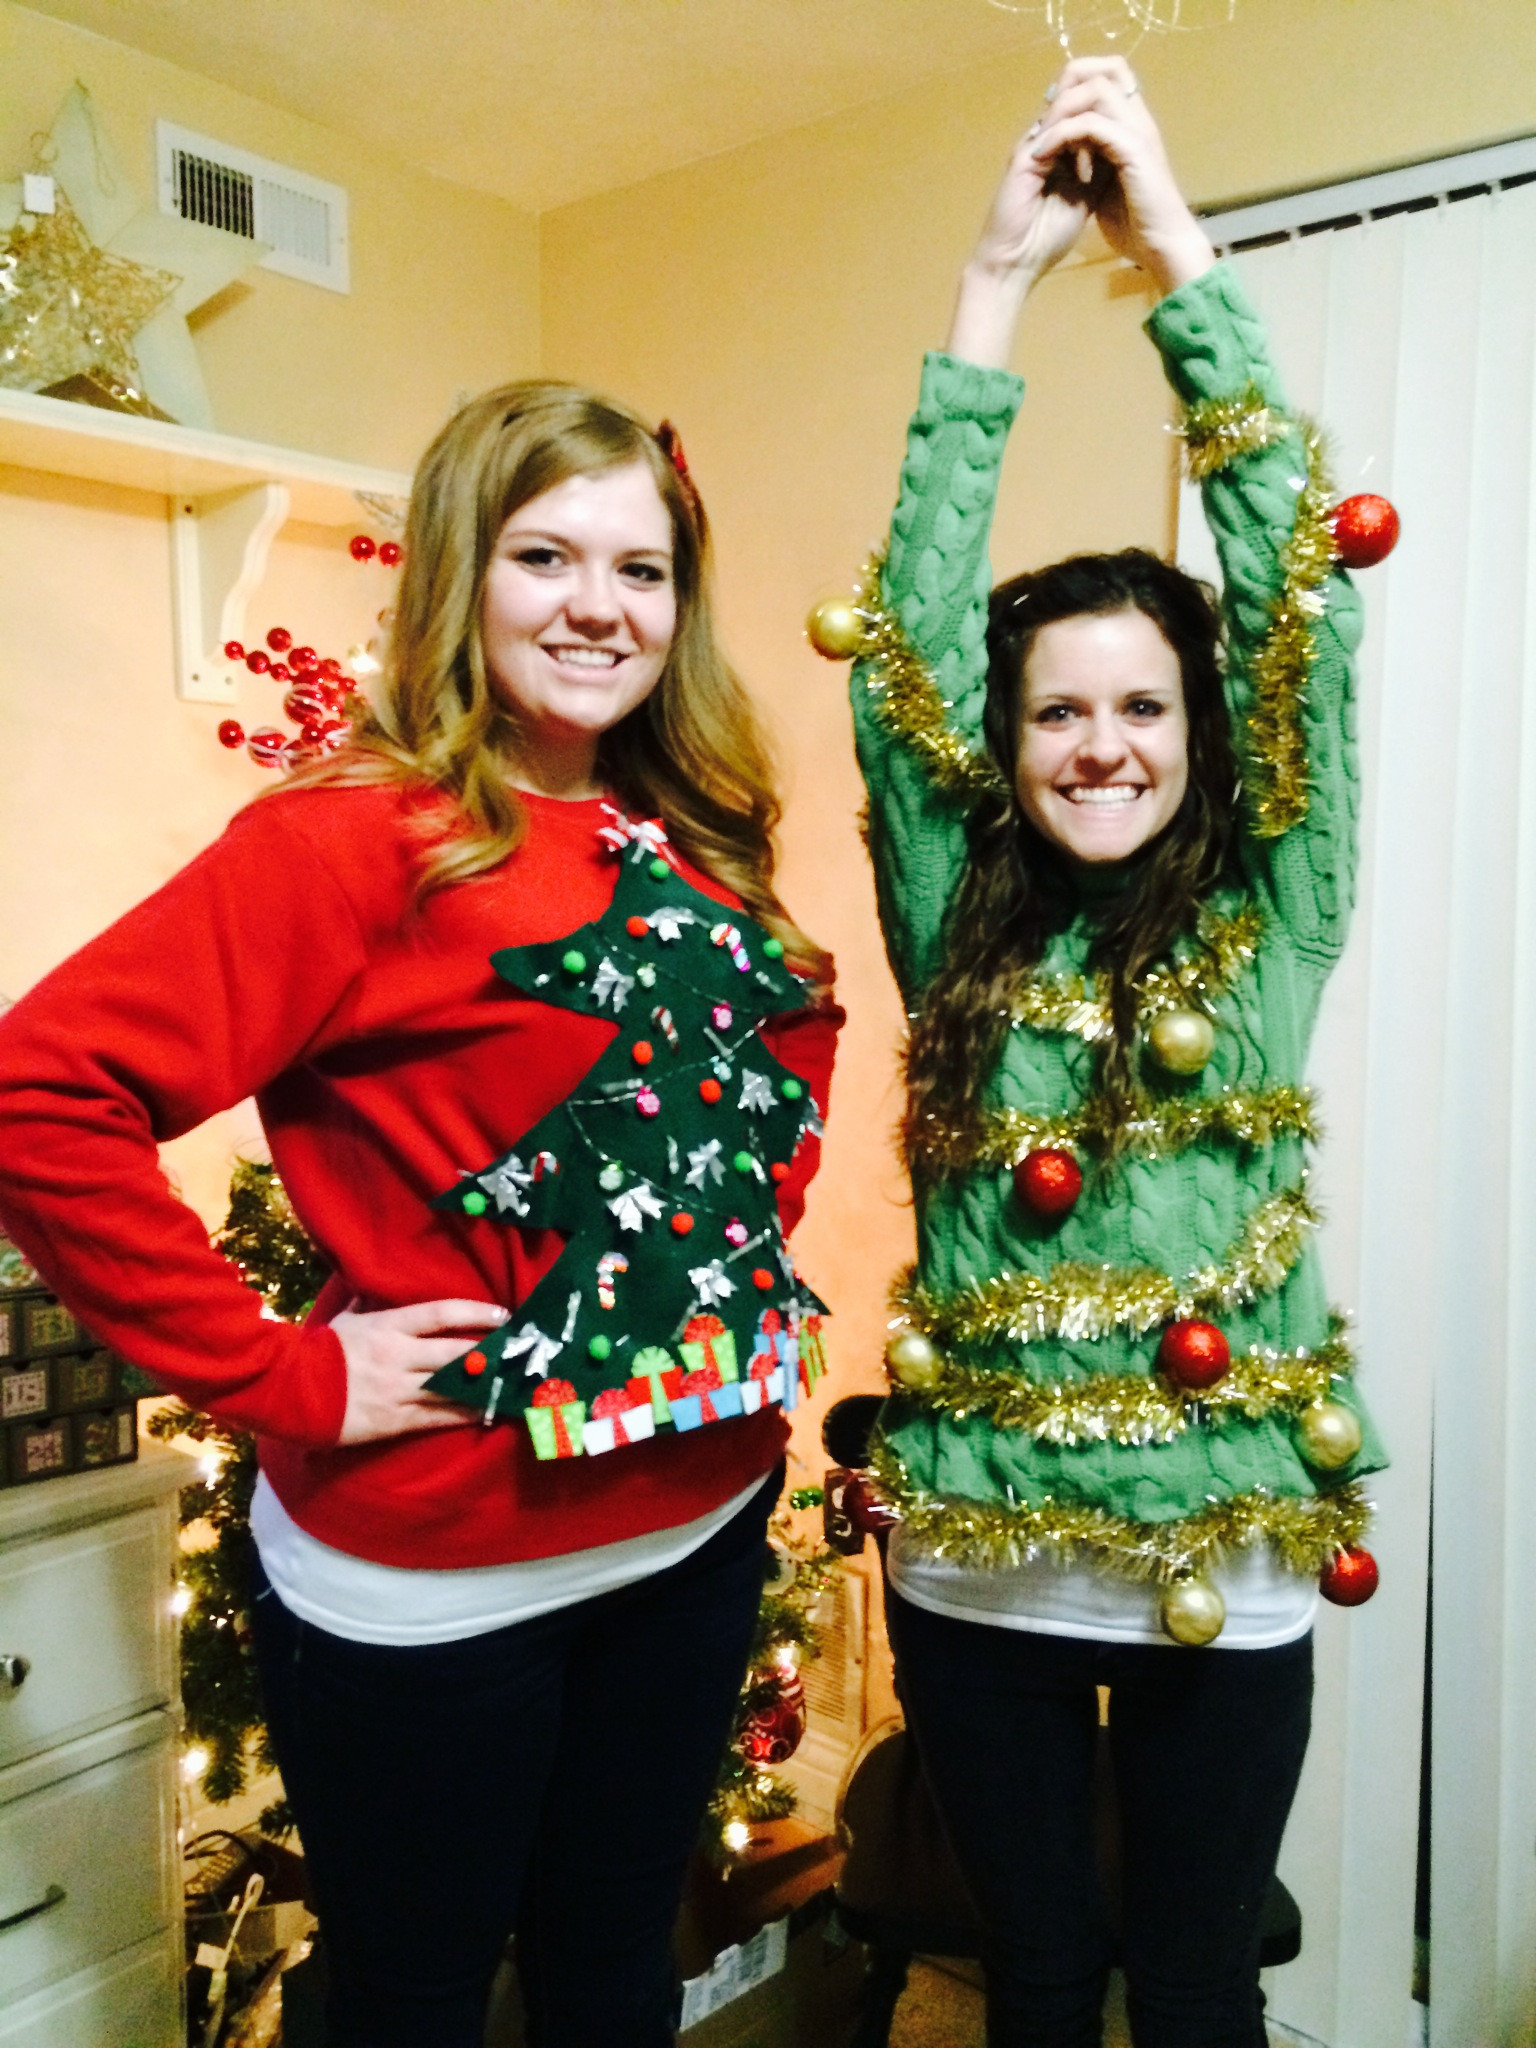 DIY Ugly Christmas Sweater
 DIY Ugly Sweater Ideas